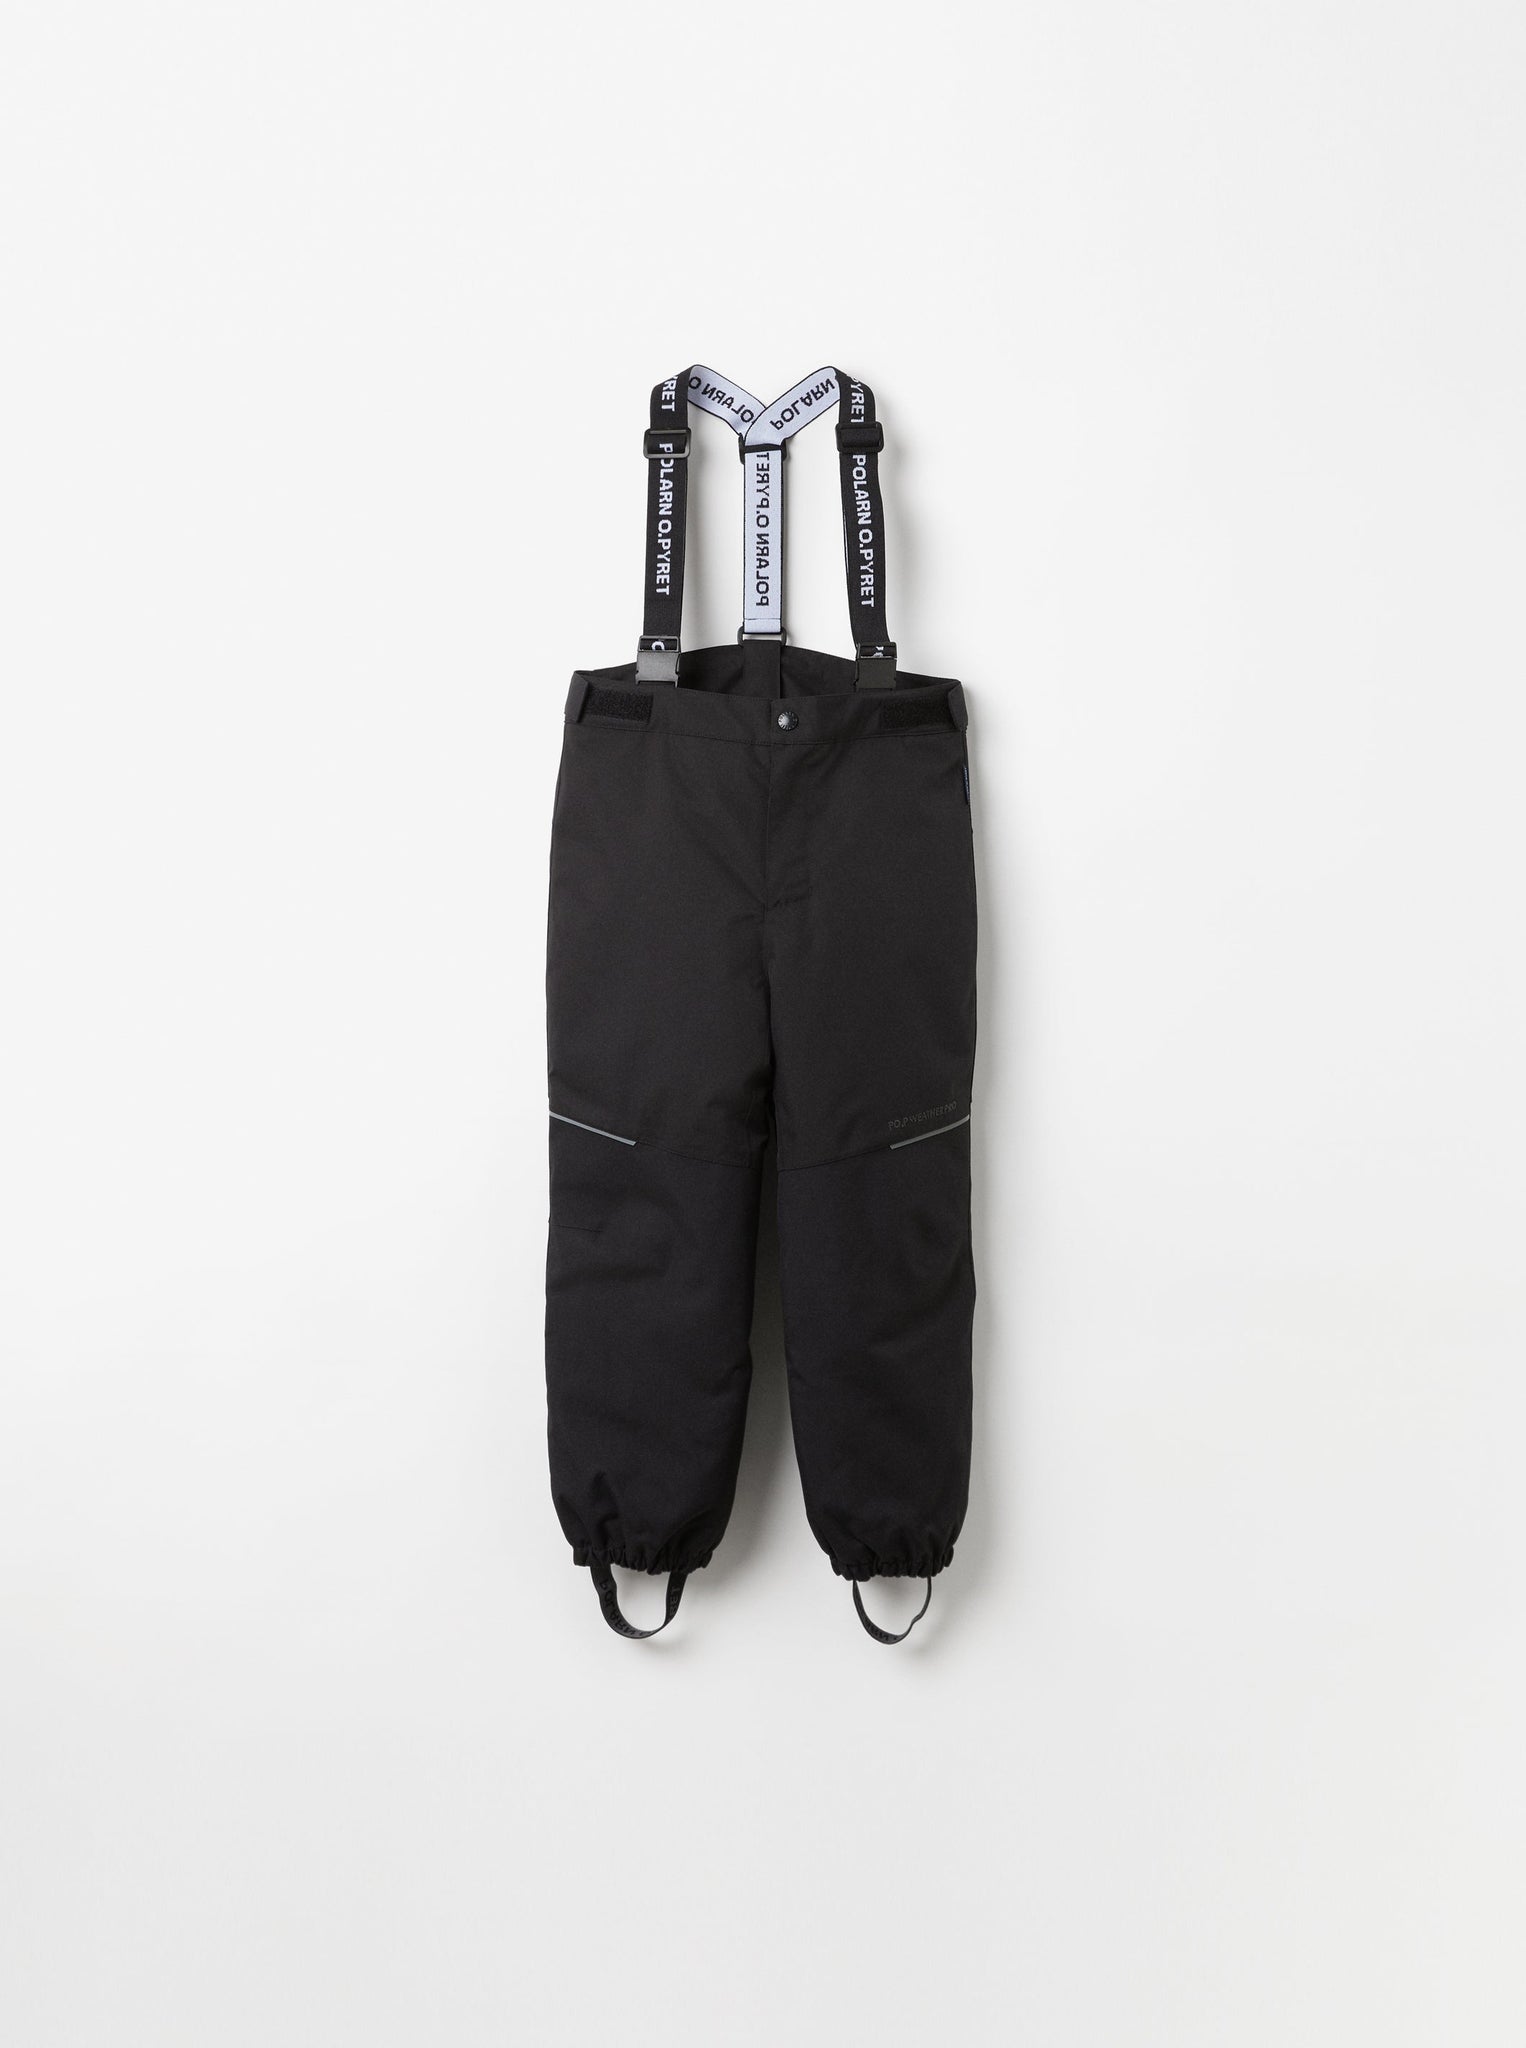 Black Fleece Lined Kids Shell Trousers from the Polarn O. Pyret kidswear collection. Sustainably produced kids outerwear.